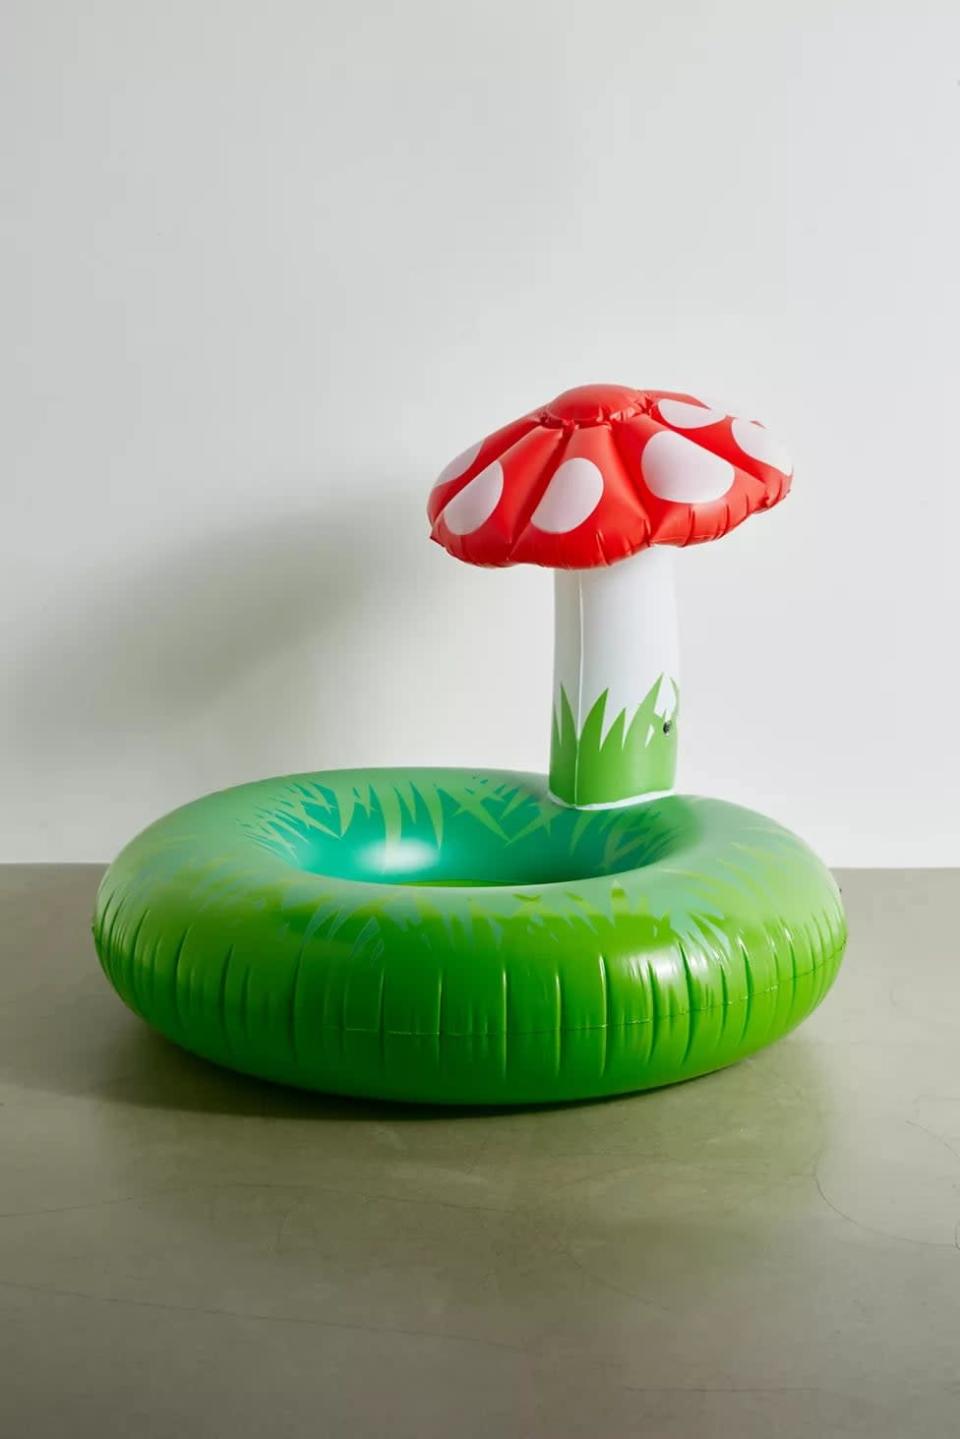 <p>The <span>Mushroom Pool Float</span> ($38) is a fun tube that will add a dash of color and whimsy to your poolside. The float has a propped-up mushroom that can provide some much-needed shade. </p>